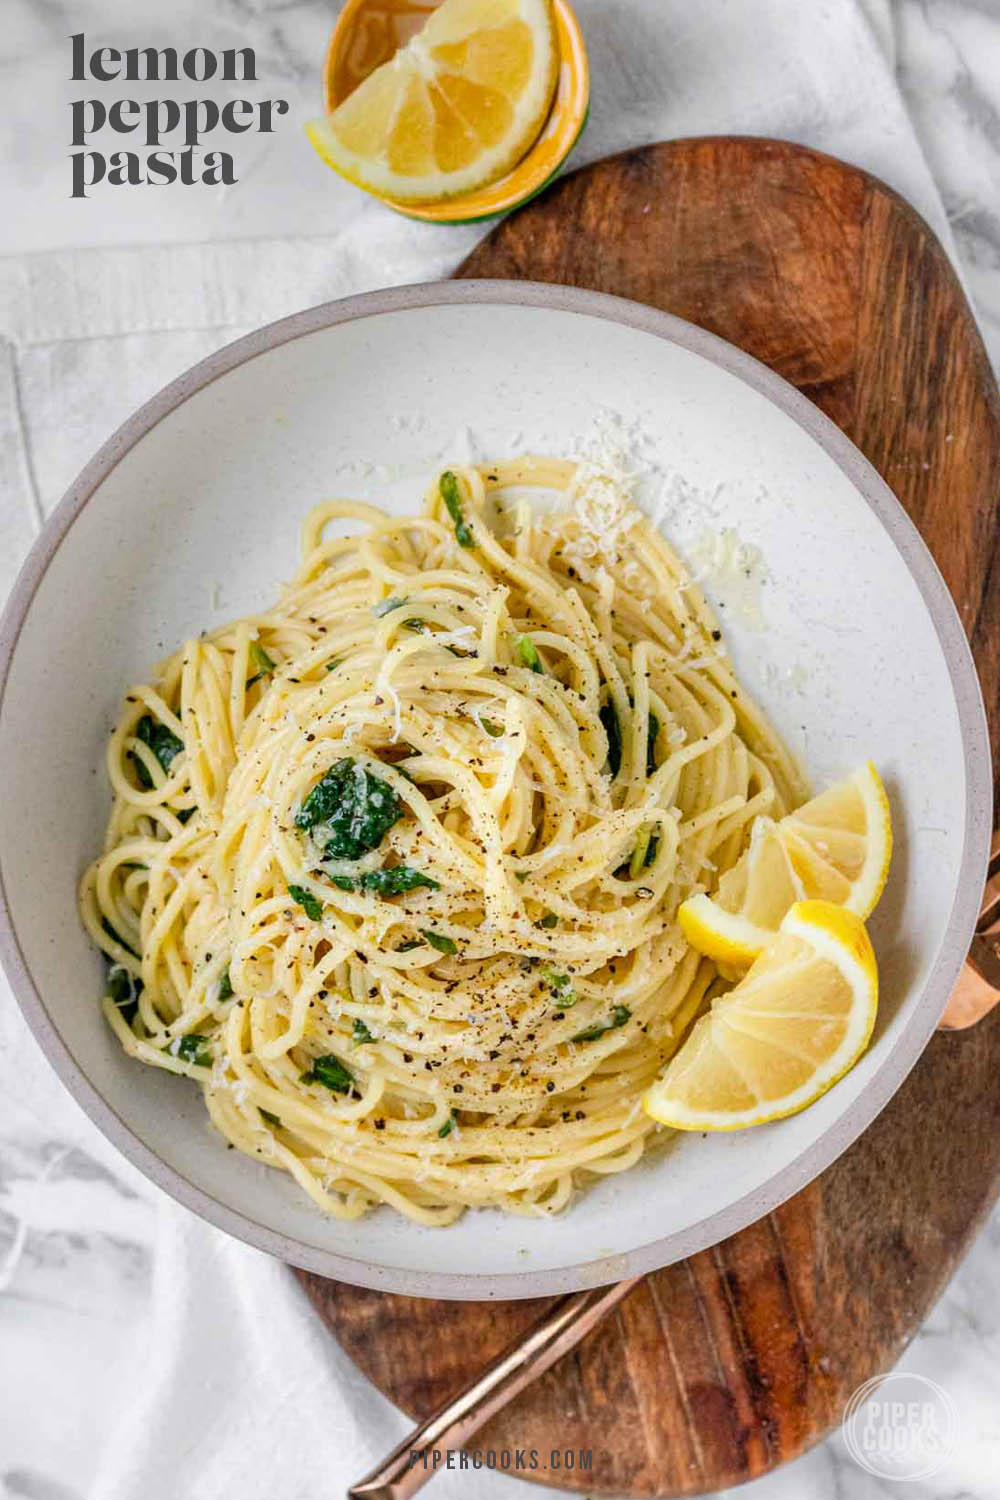 Pasta swirled in a bowl with spinach, cheese, and lemon slices on the side.